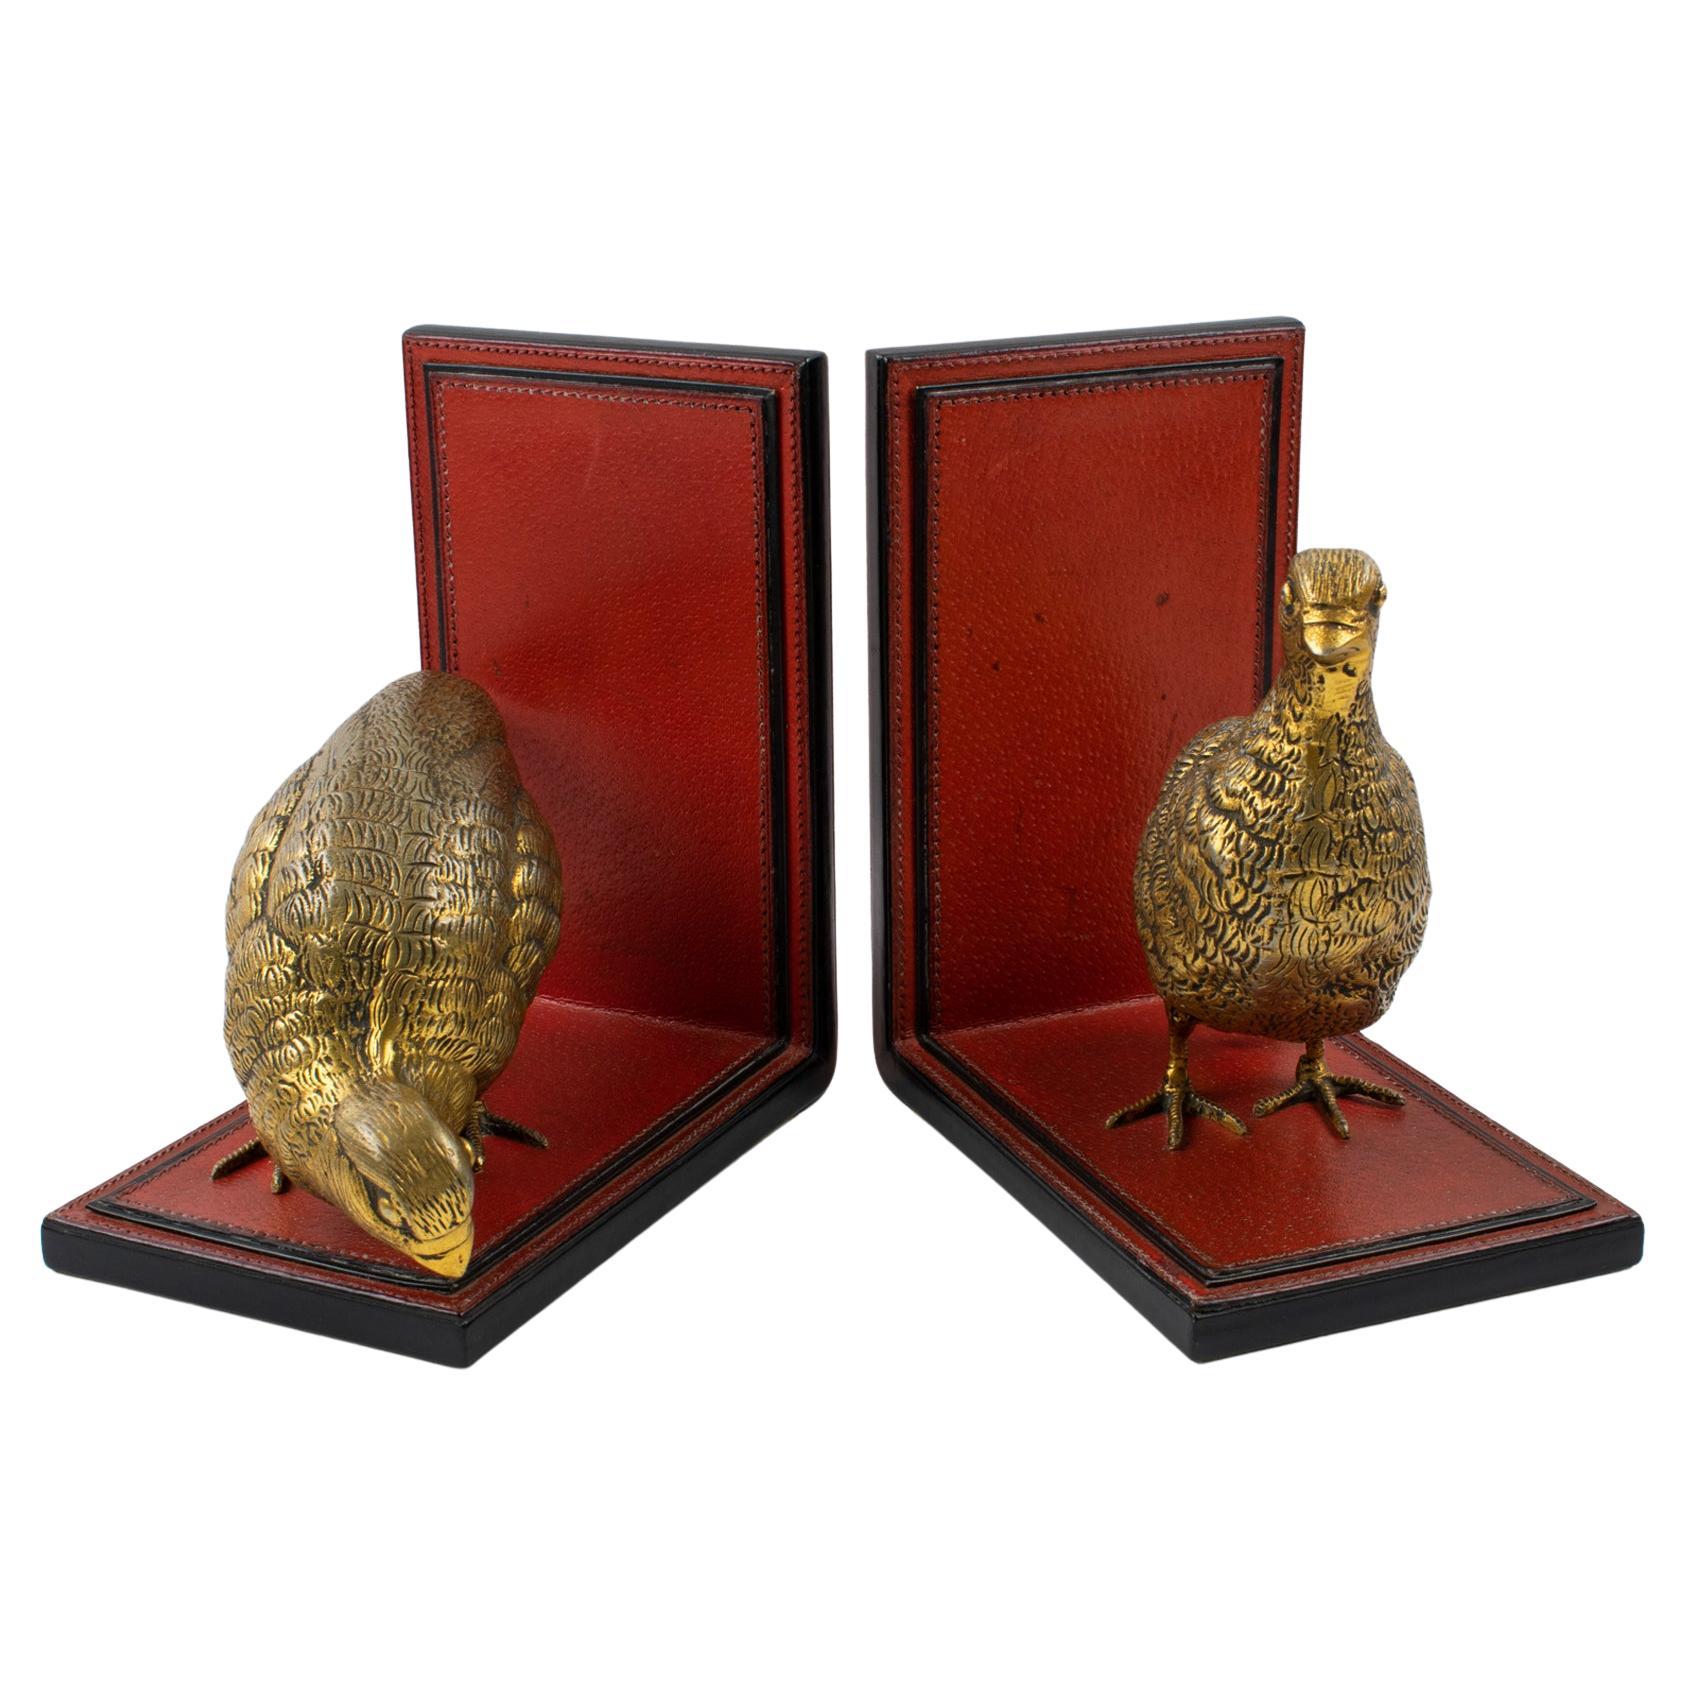 Gucci Italy Hand-Stitched Red Leather Bookends with Gilt Metal Partridges, 1970s For Sale